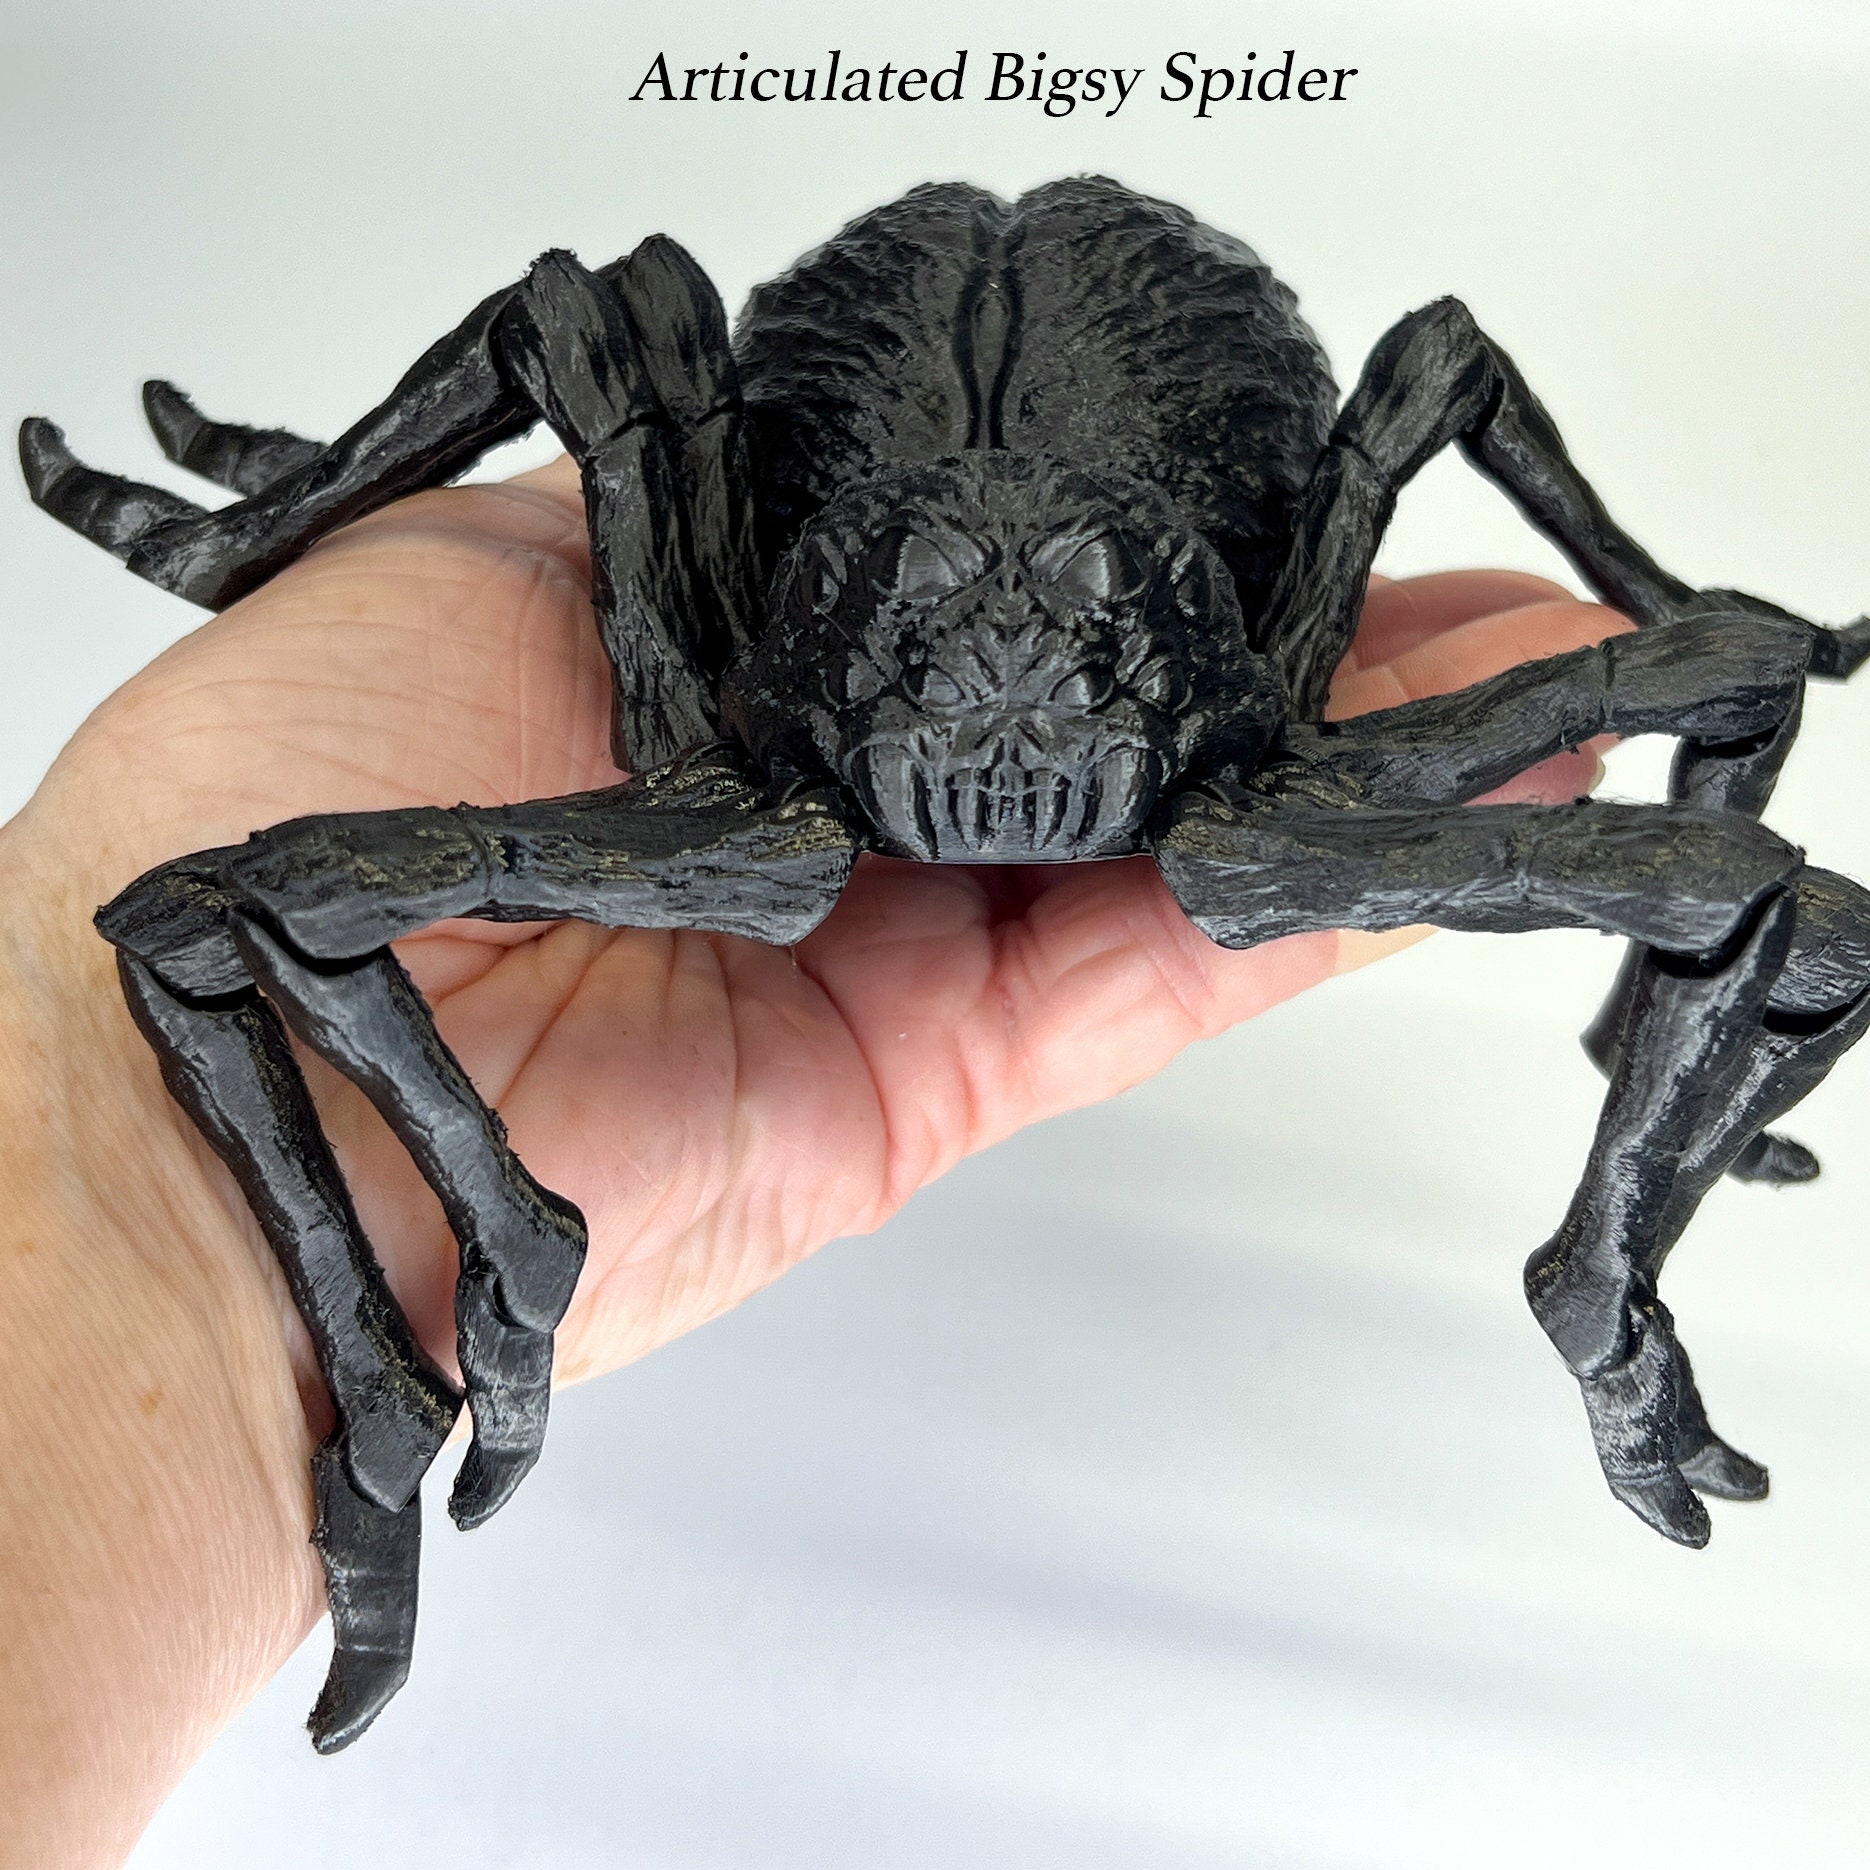 Realistic Spider Fidget Toy 3D Printed Articulated Spinner 